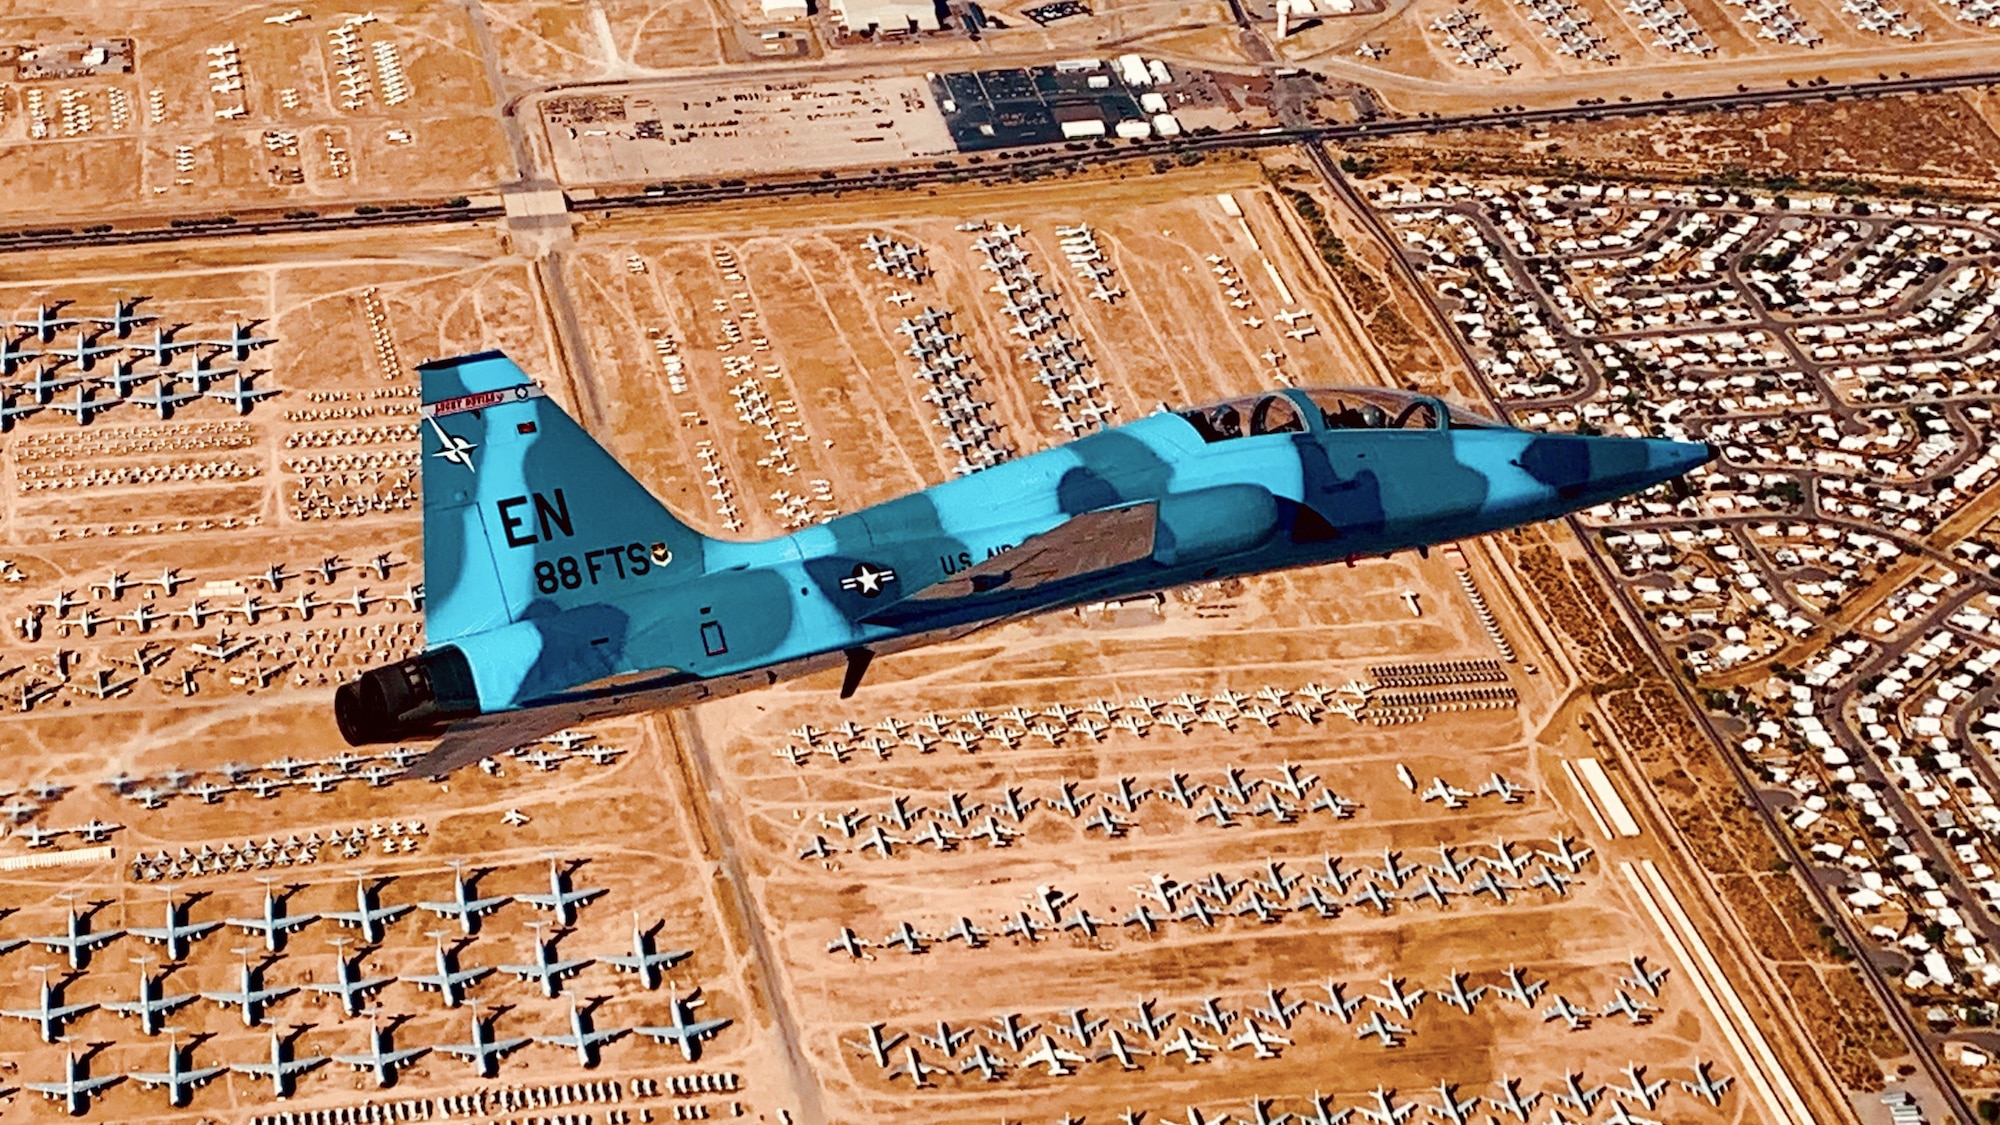 88th FTS plays aggressor role in Arizona